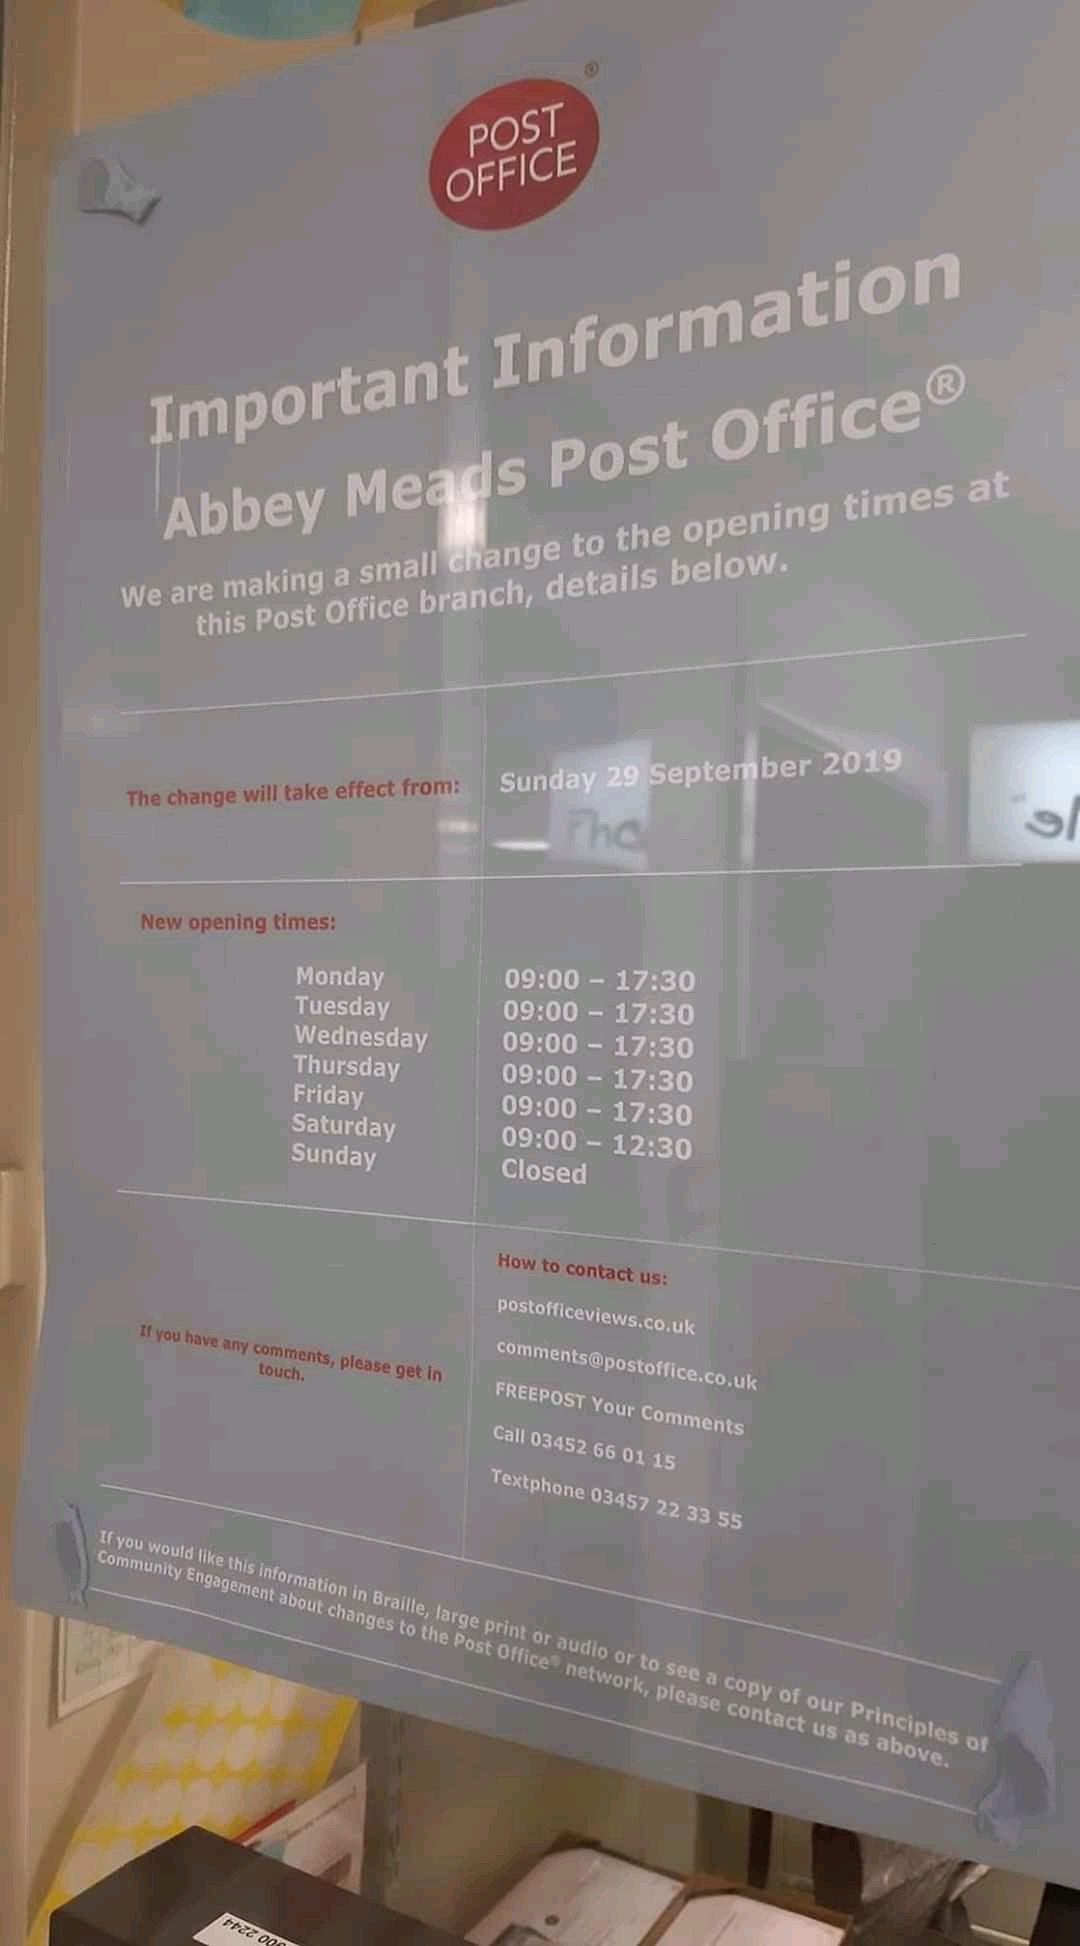 Abbey Meads Post Office